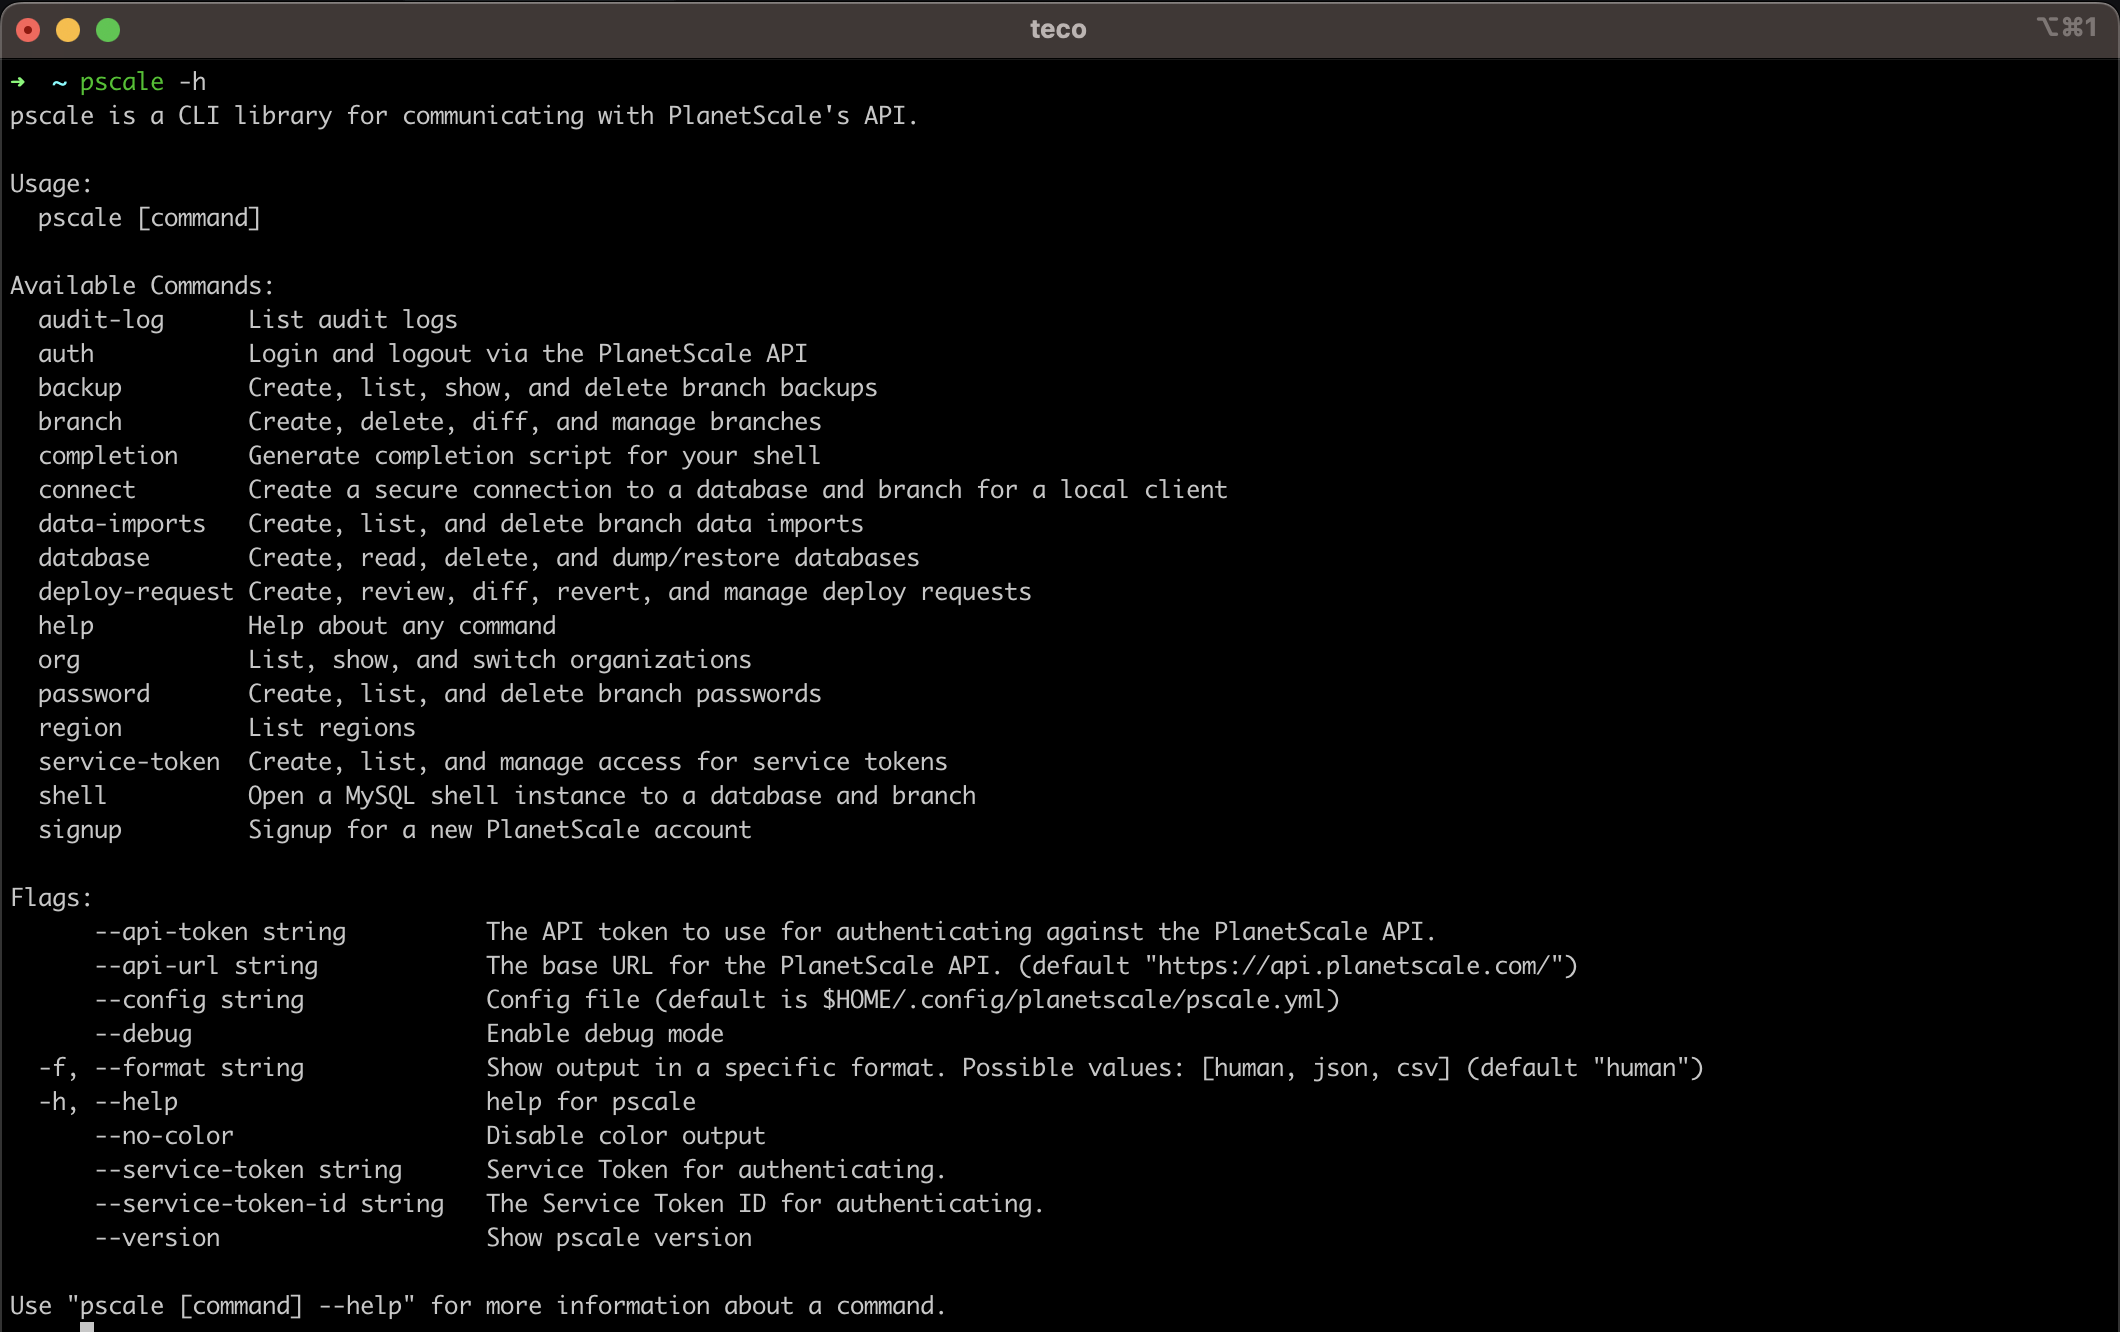 View available commands to use with the PlanetScale CLI.